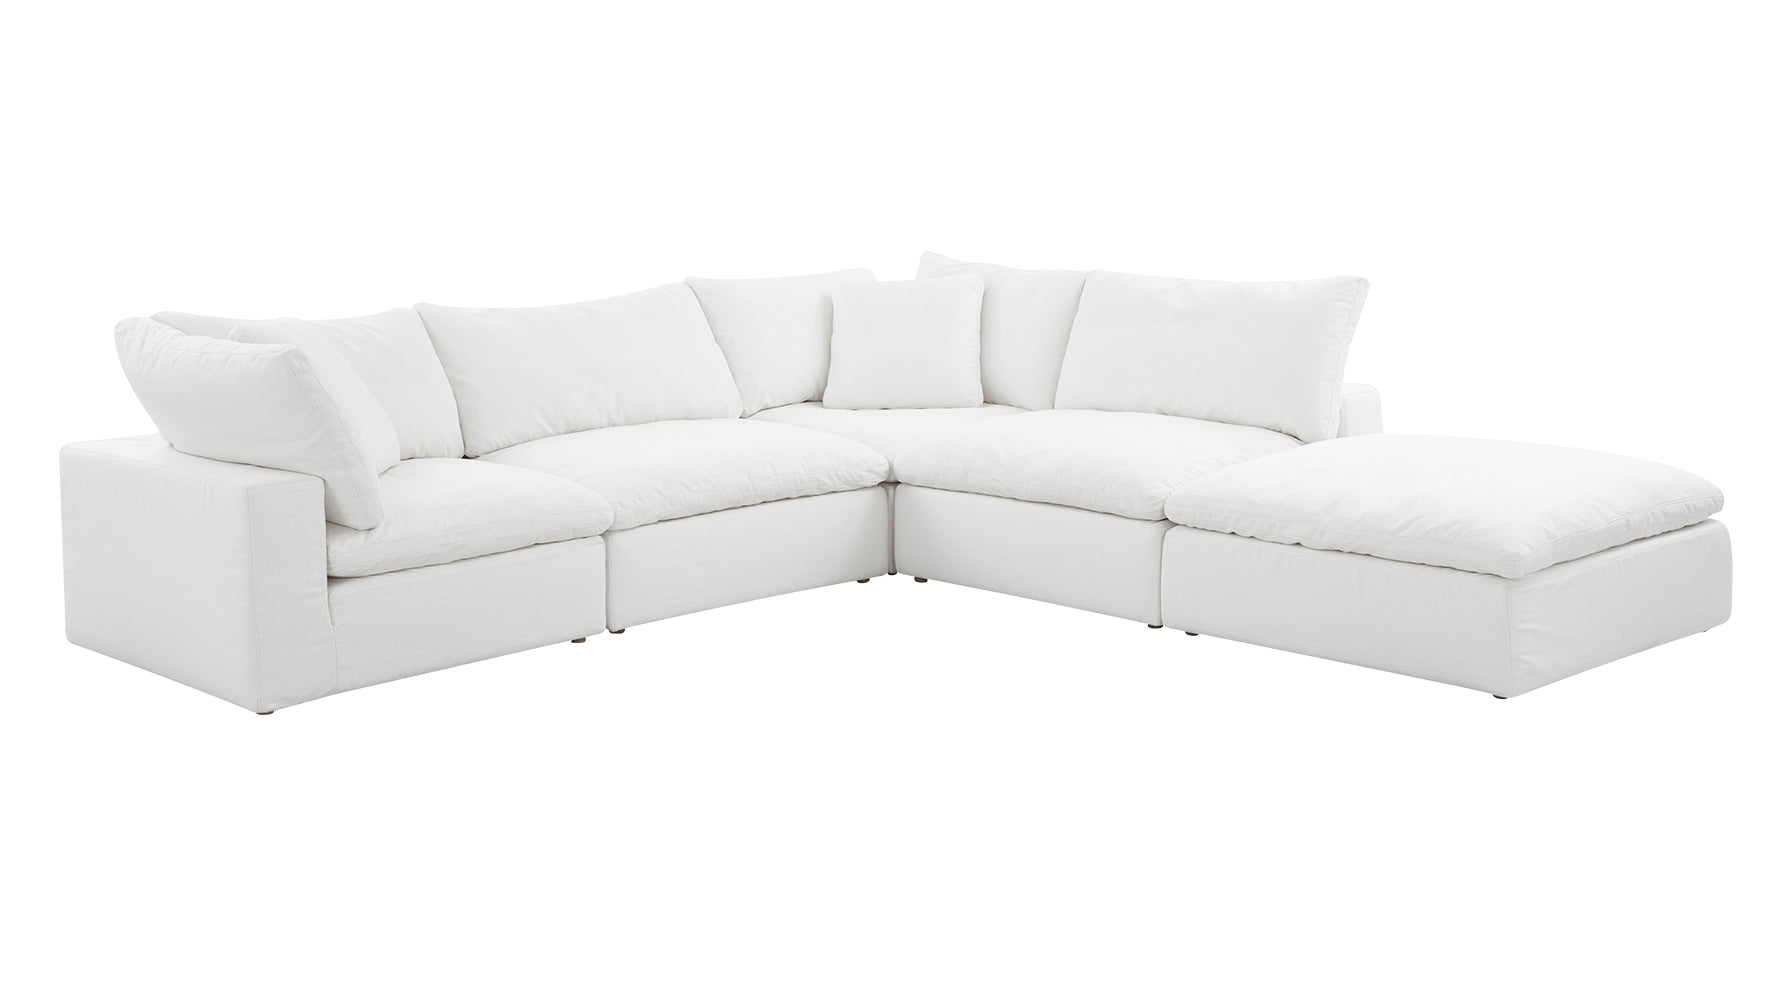 Movie Night™ 5-Piece Modular Sectional, Large, Brie - Image 4